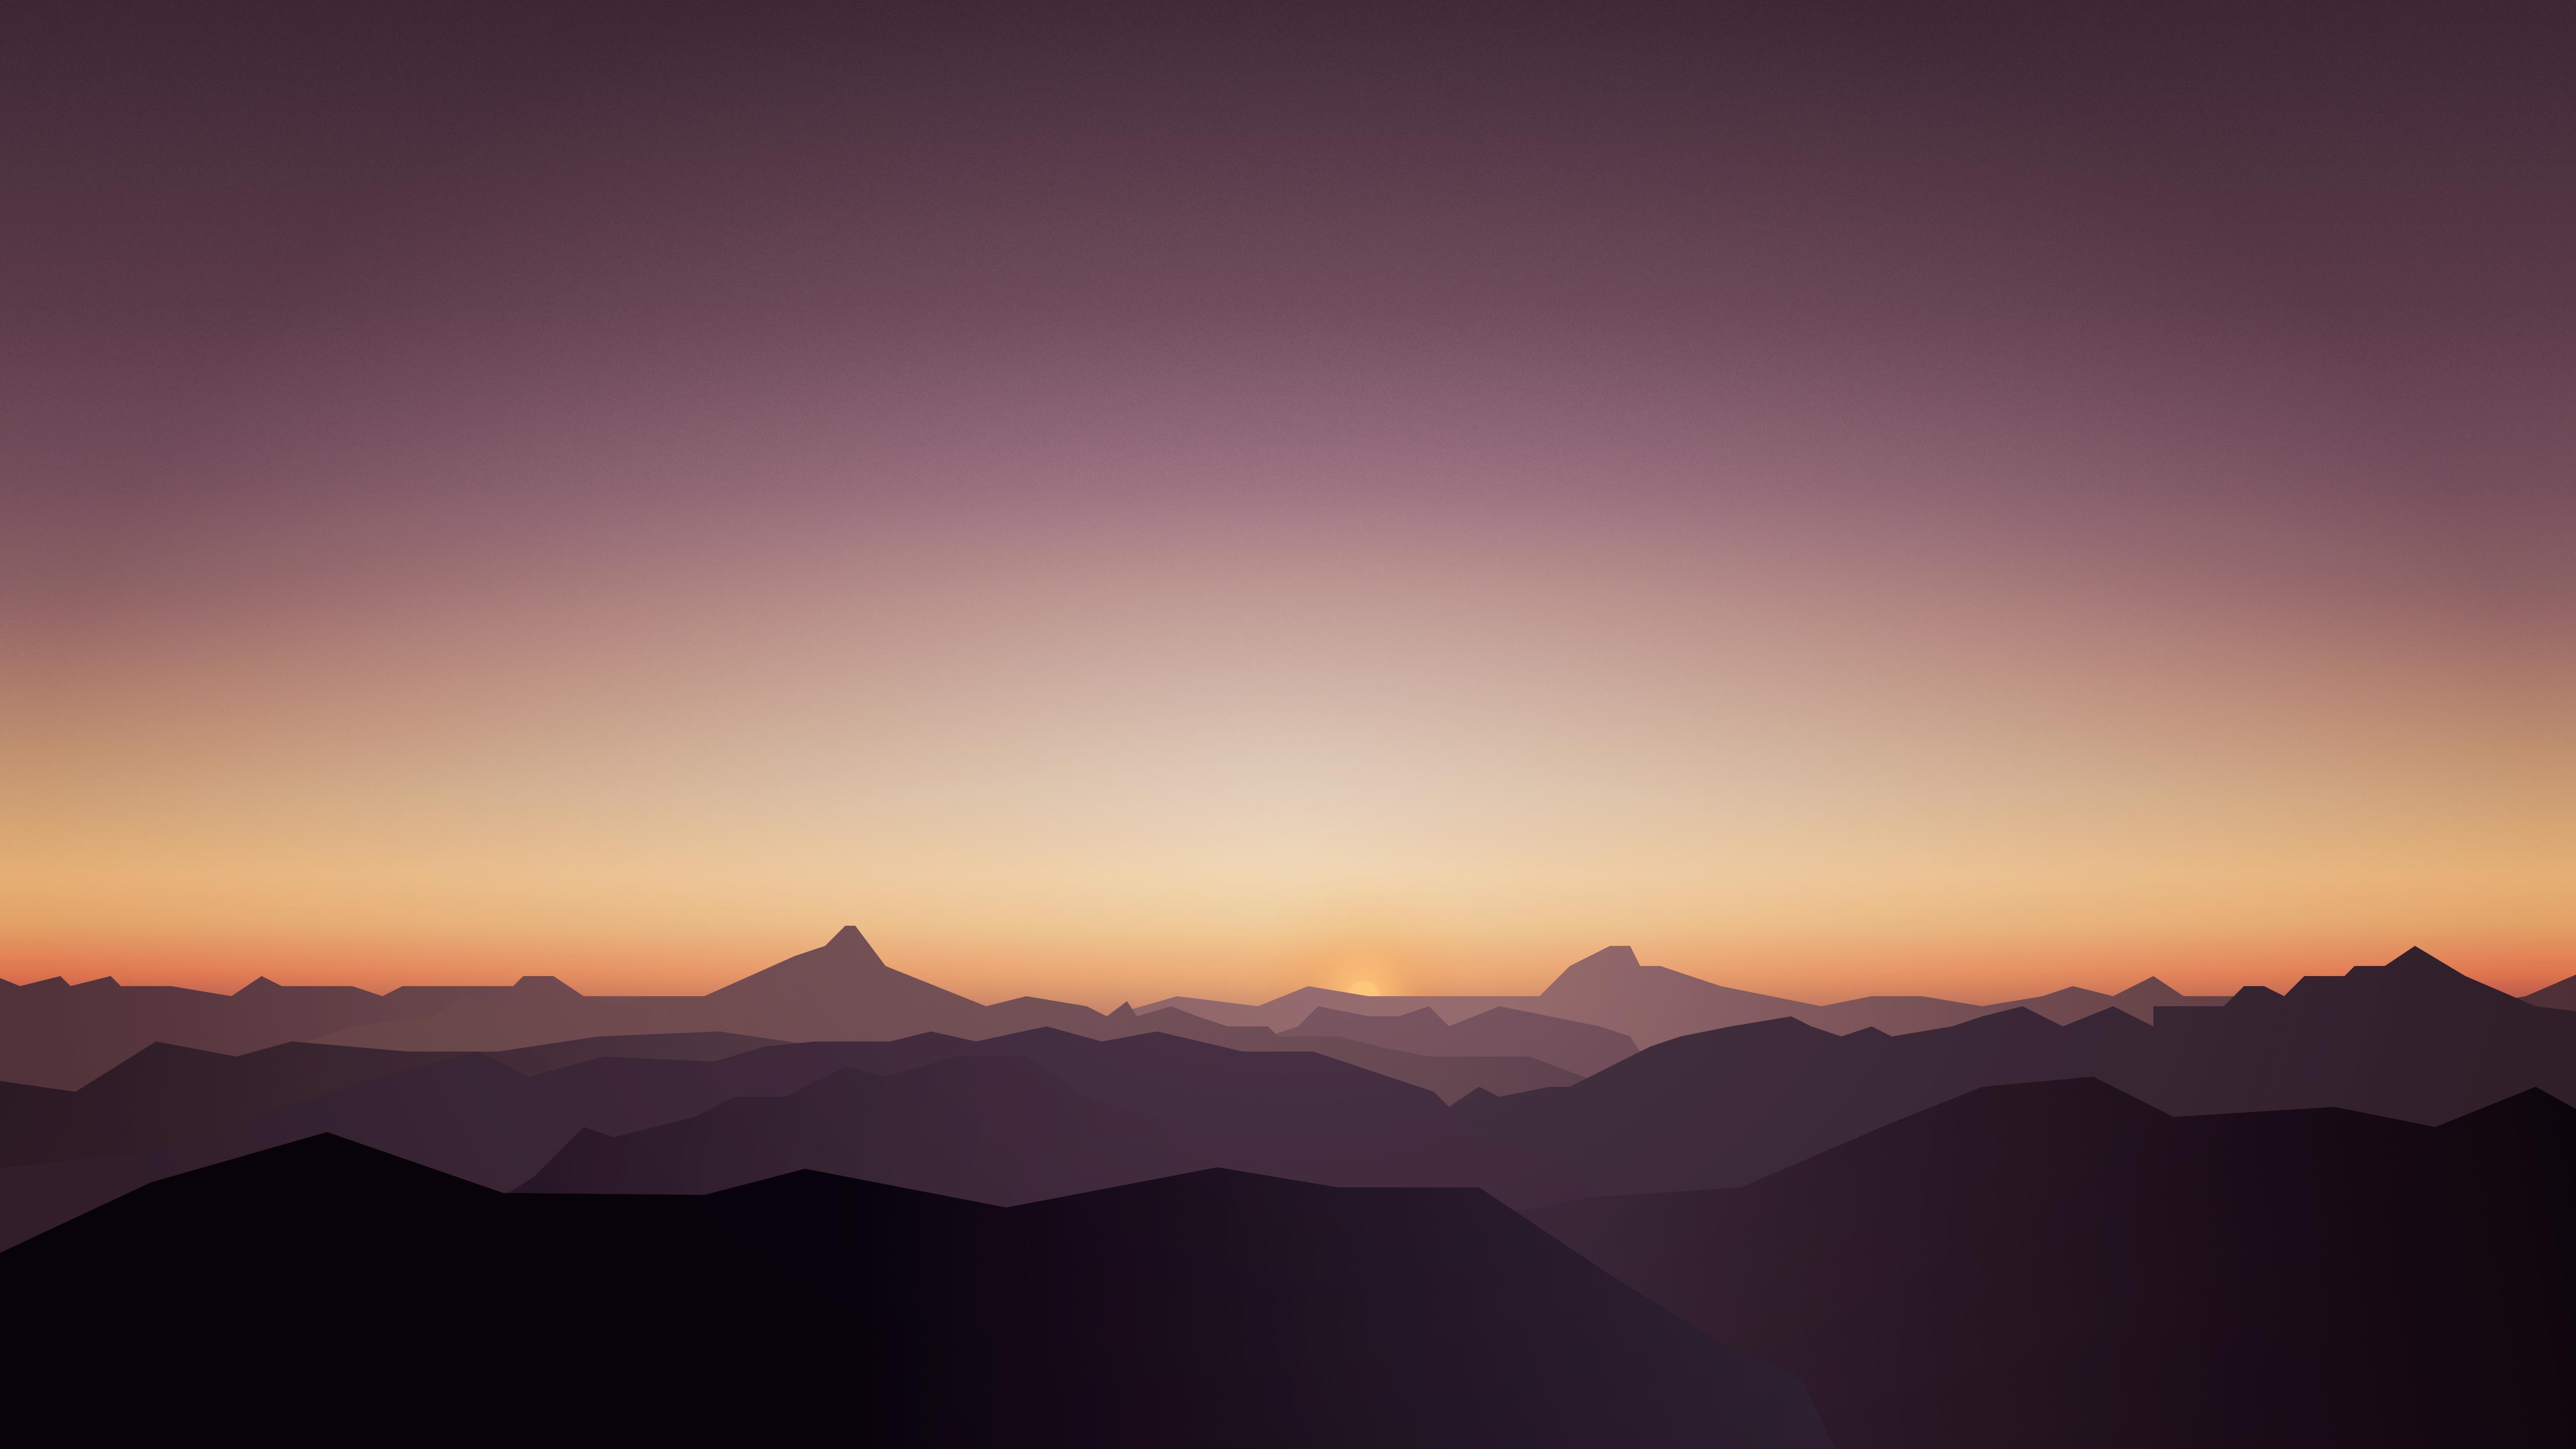 Wallpaper Mountains, Silent, Sunset, Minimal, 5K, Nature,. Wallpaper for iPhone, Android, Mobile and Desktop